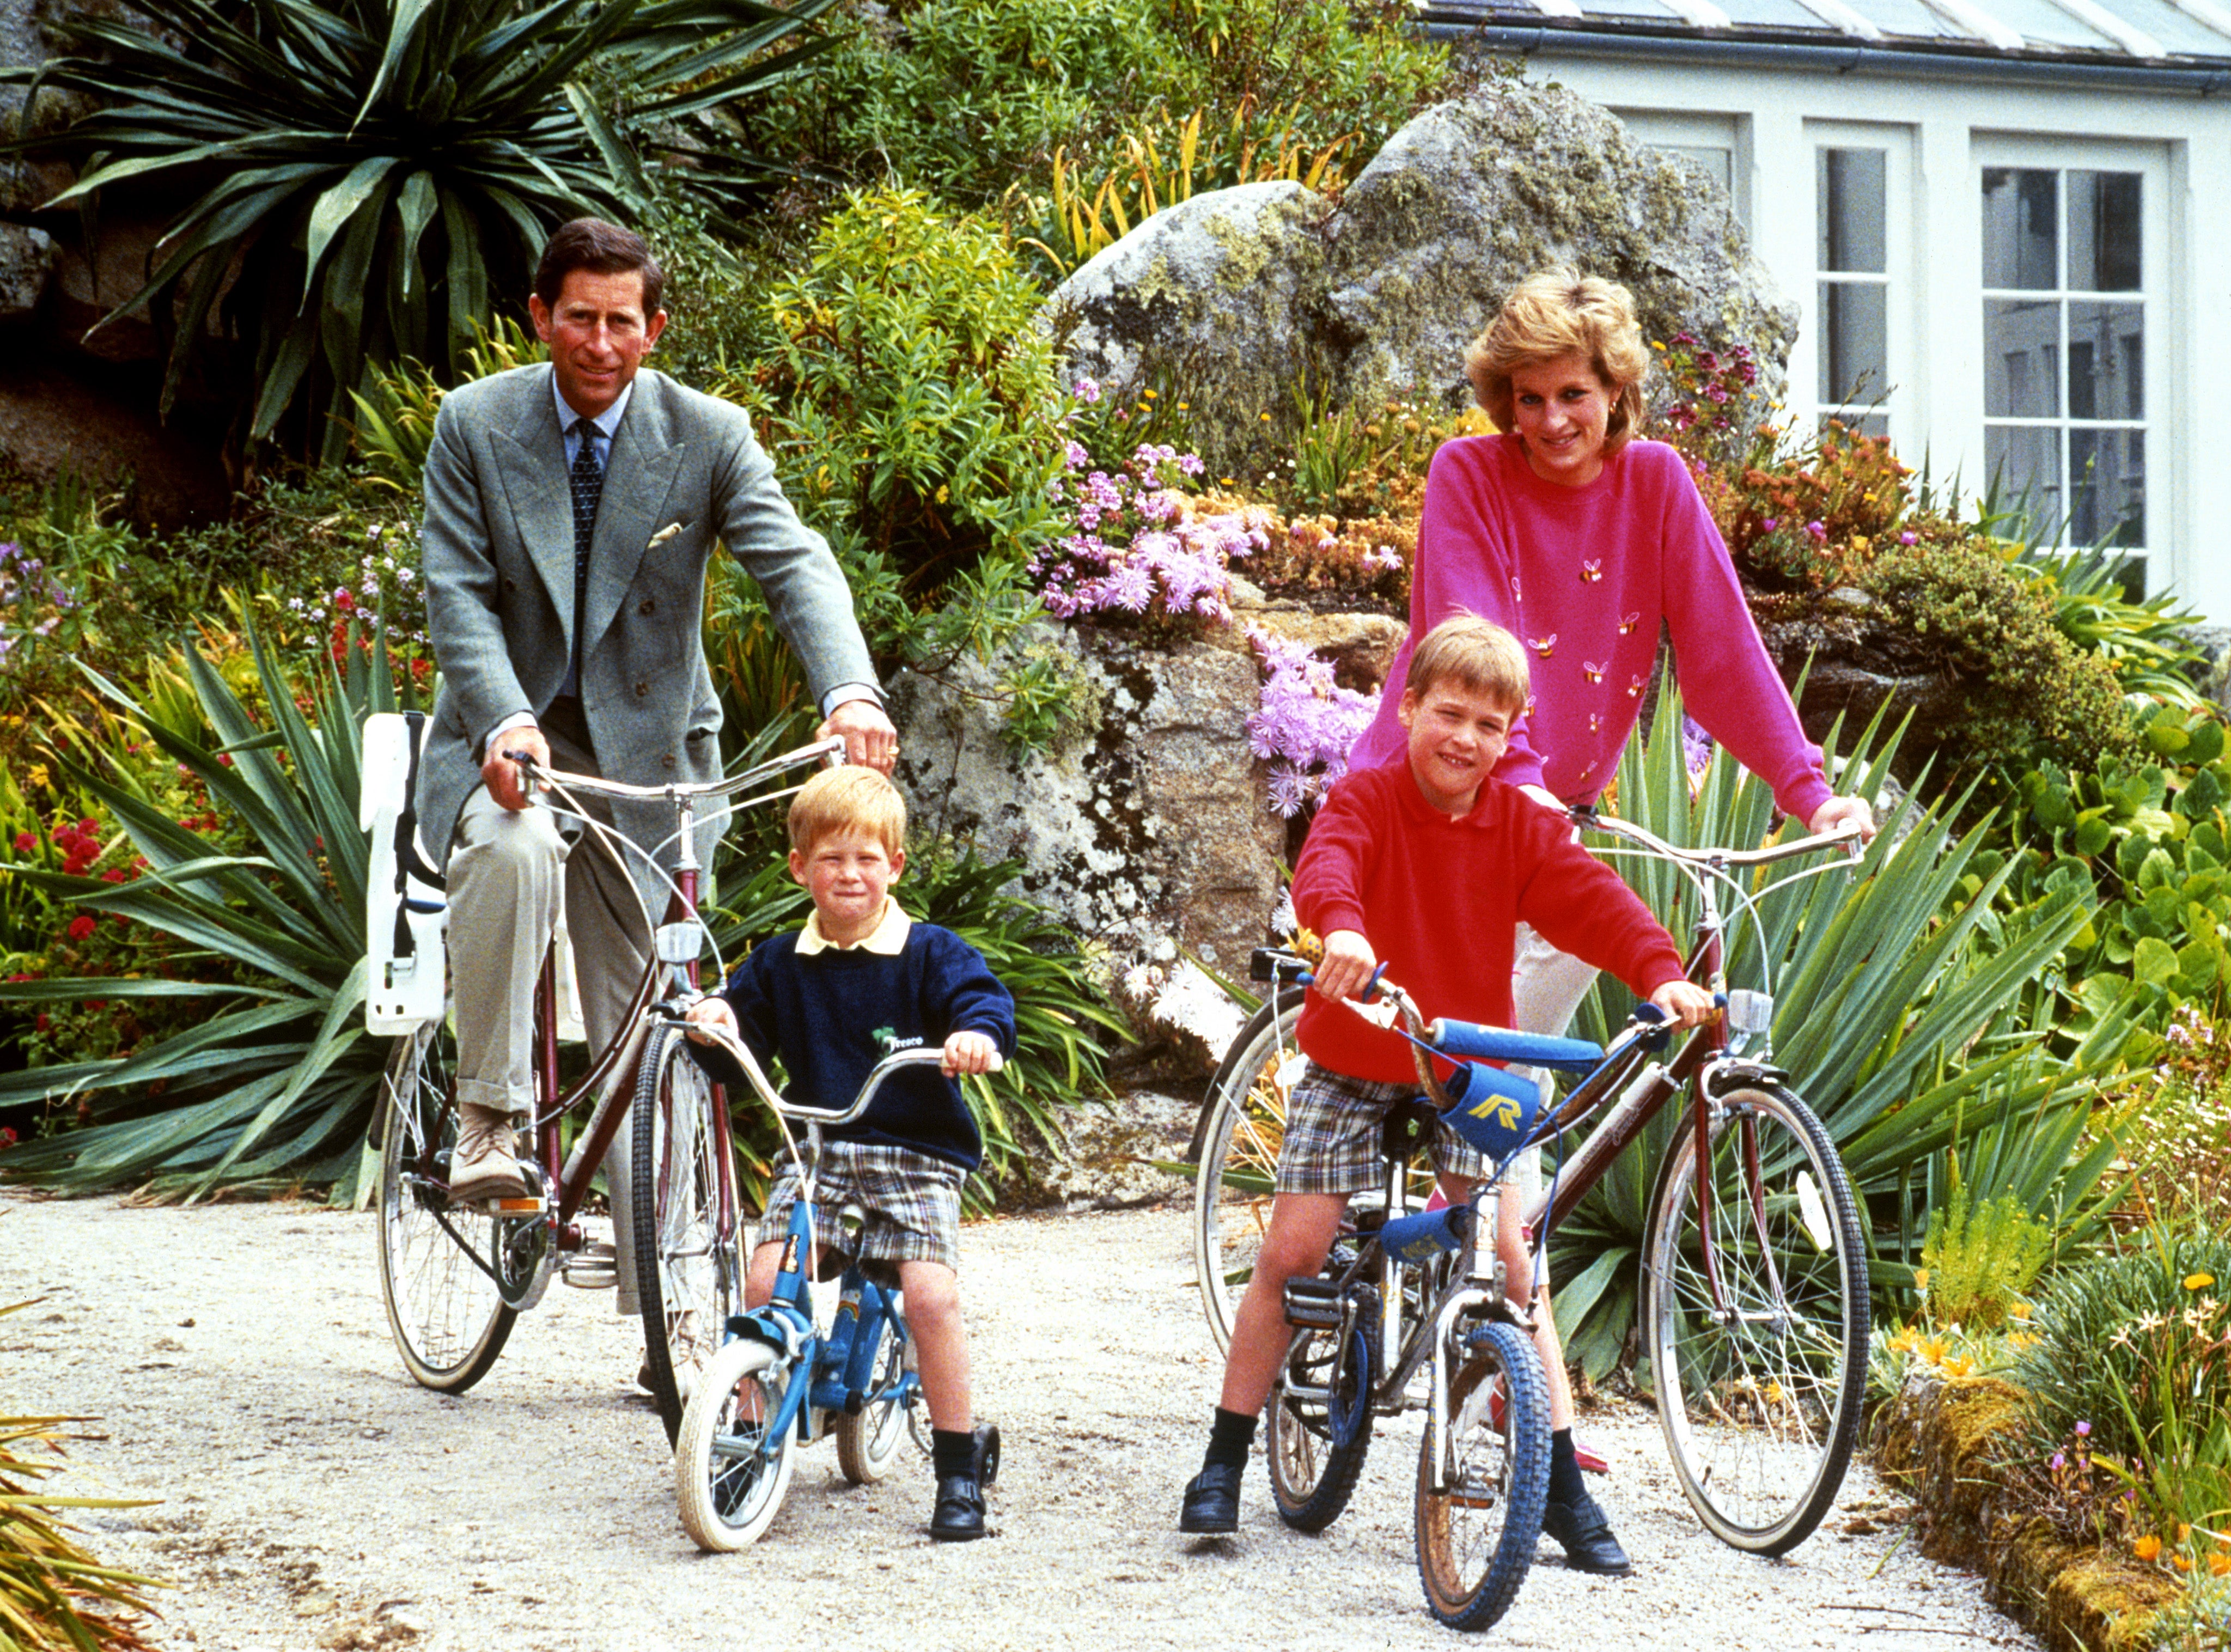 The Waleses prepare for a cycling trip in Tresco during their holiday in the Scilly Isles in 1989 (PA)